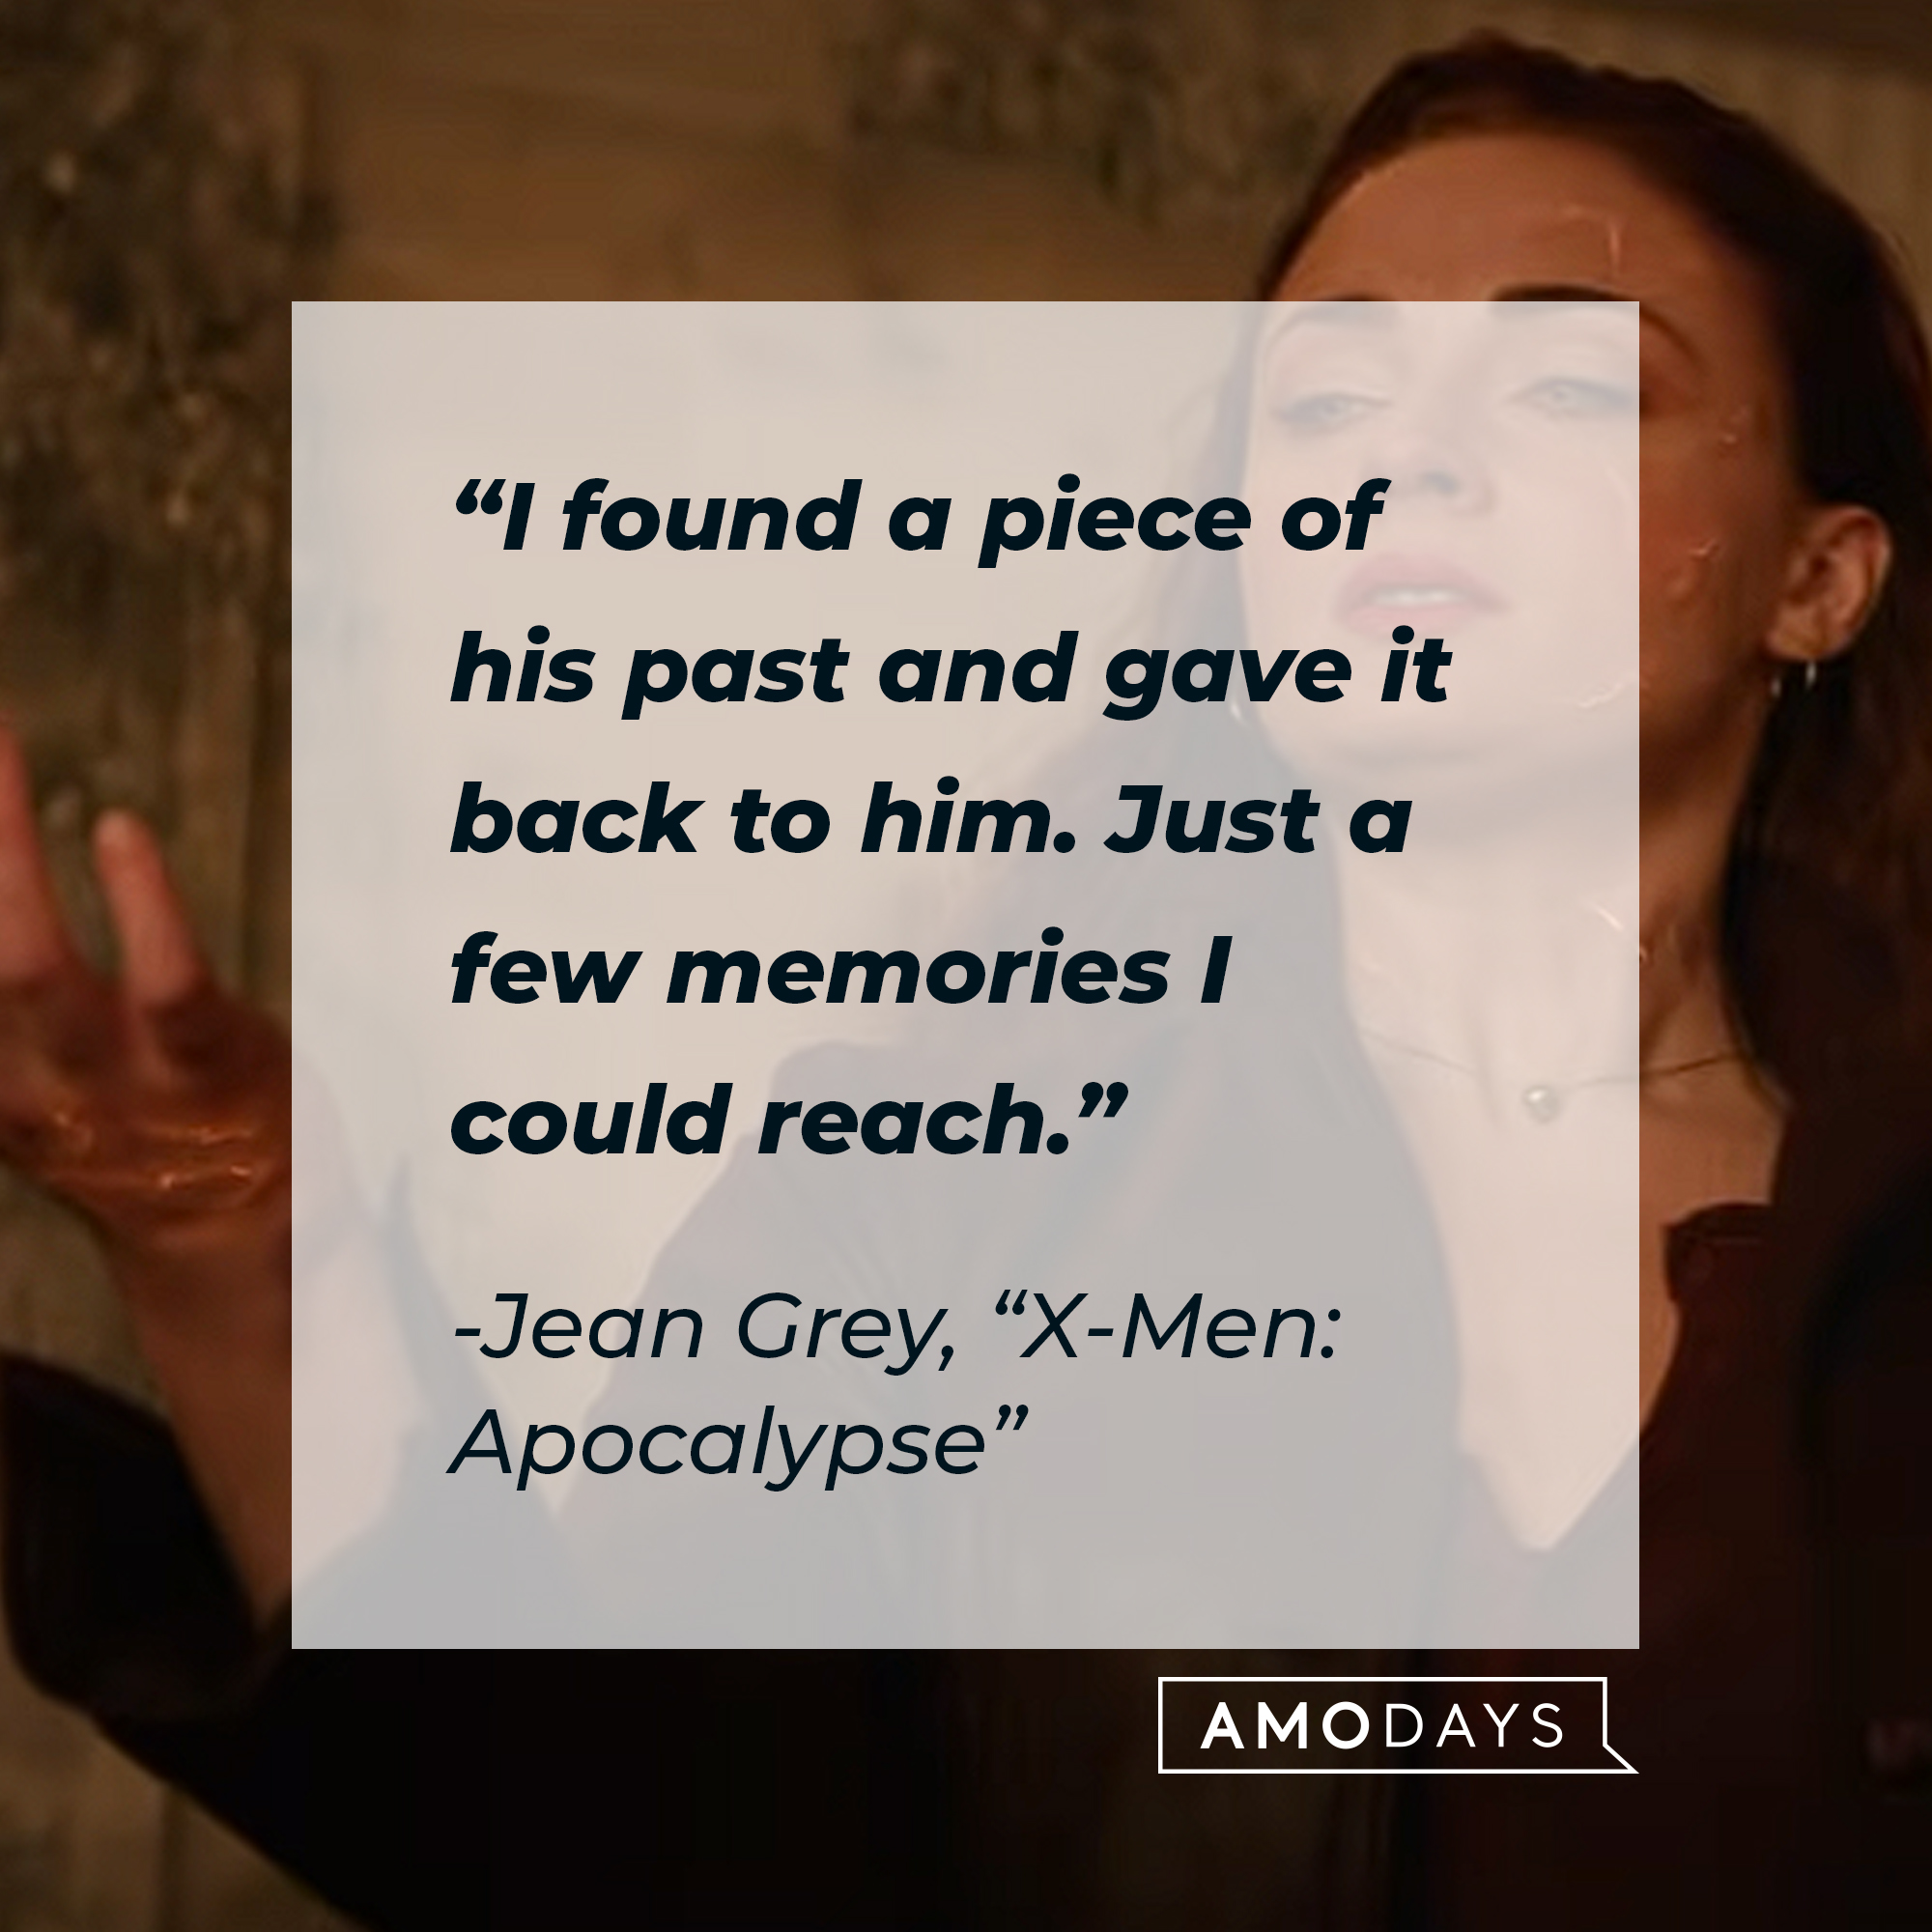 Jean Grey’s quote: "I found a piece of his past and gave it back to him. Just a few memories I could reach." | Image: Youtube.com/20thCenturyStudios